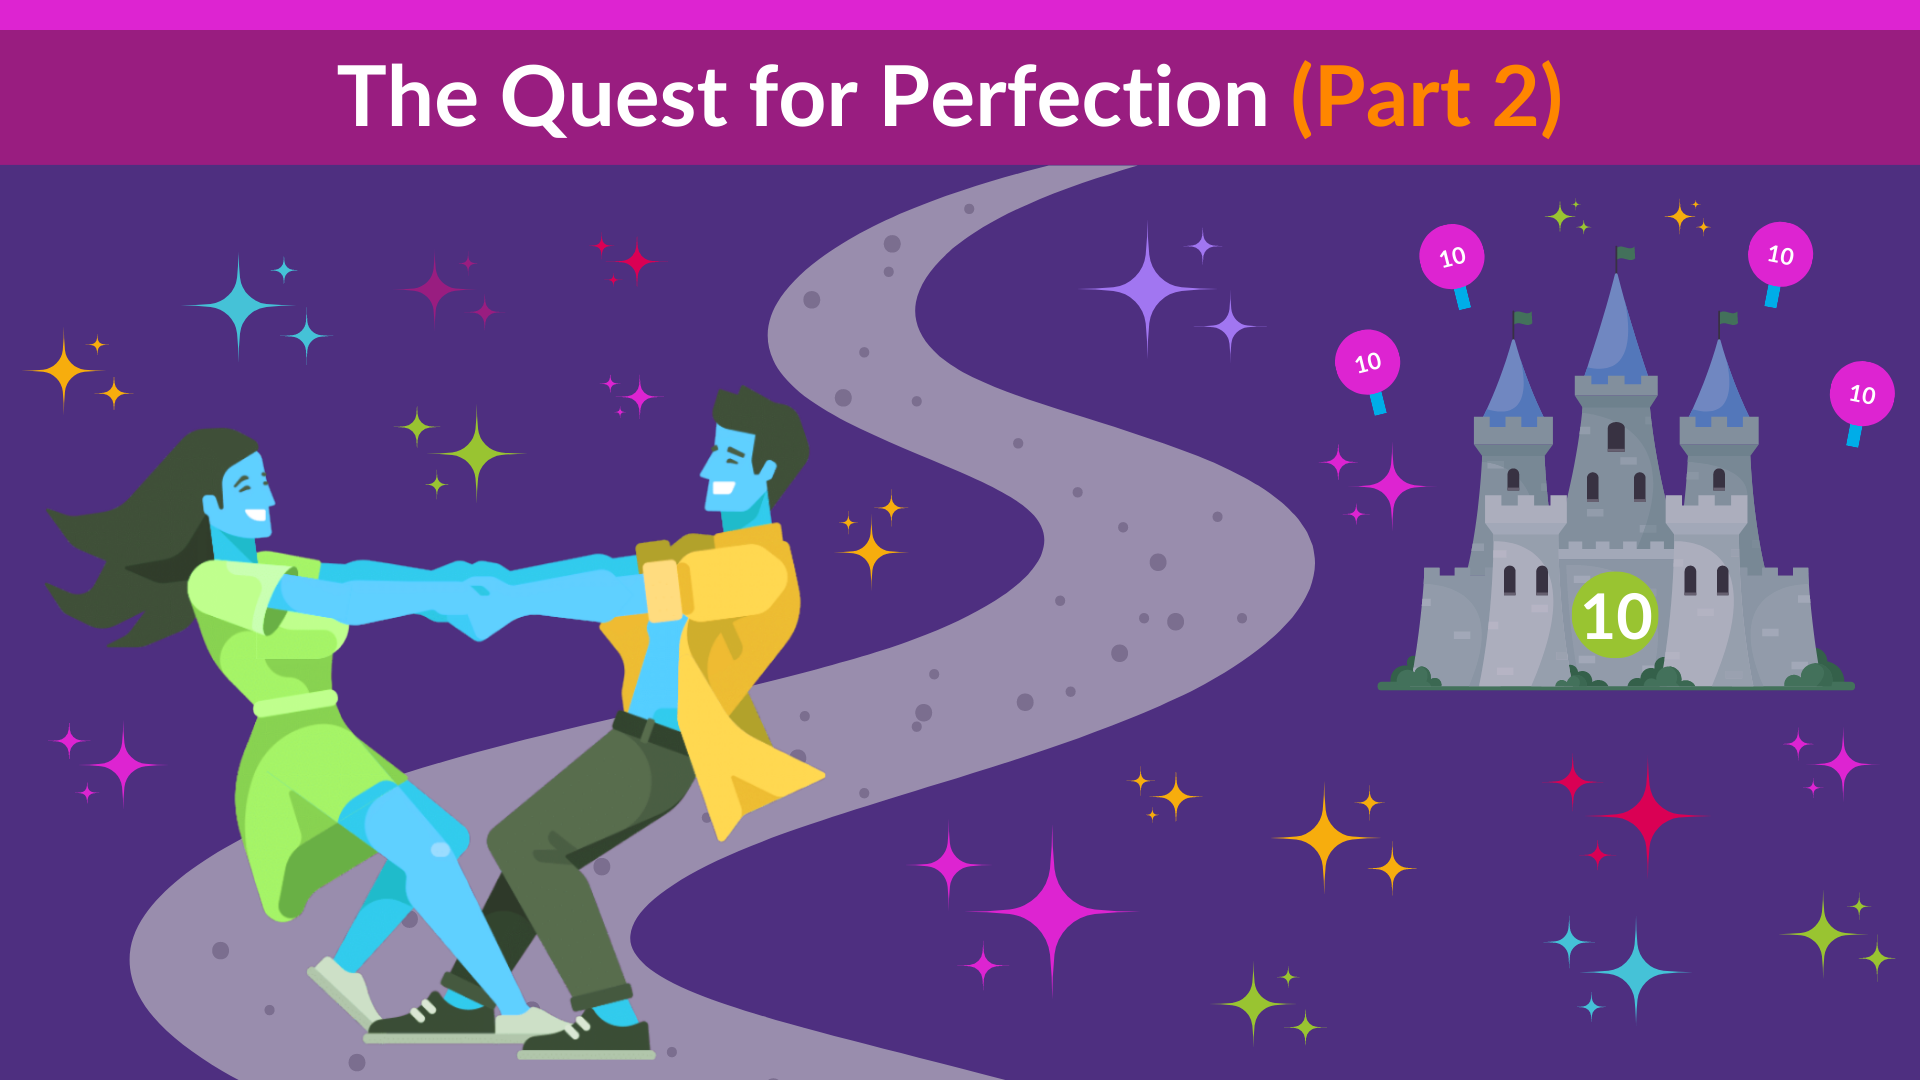 The quest for perfection part 2